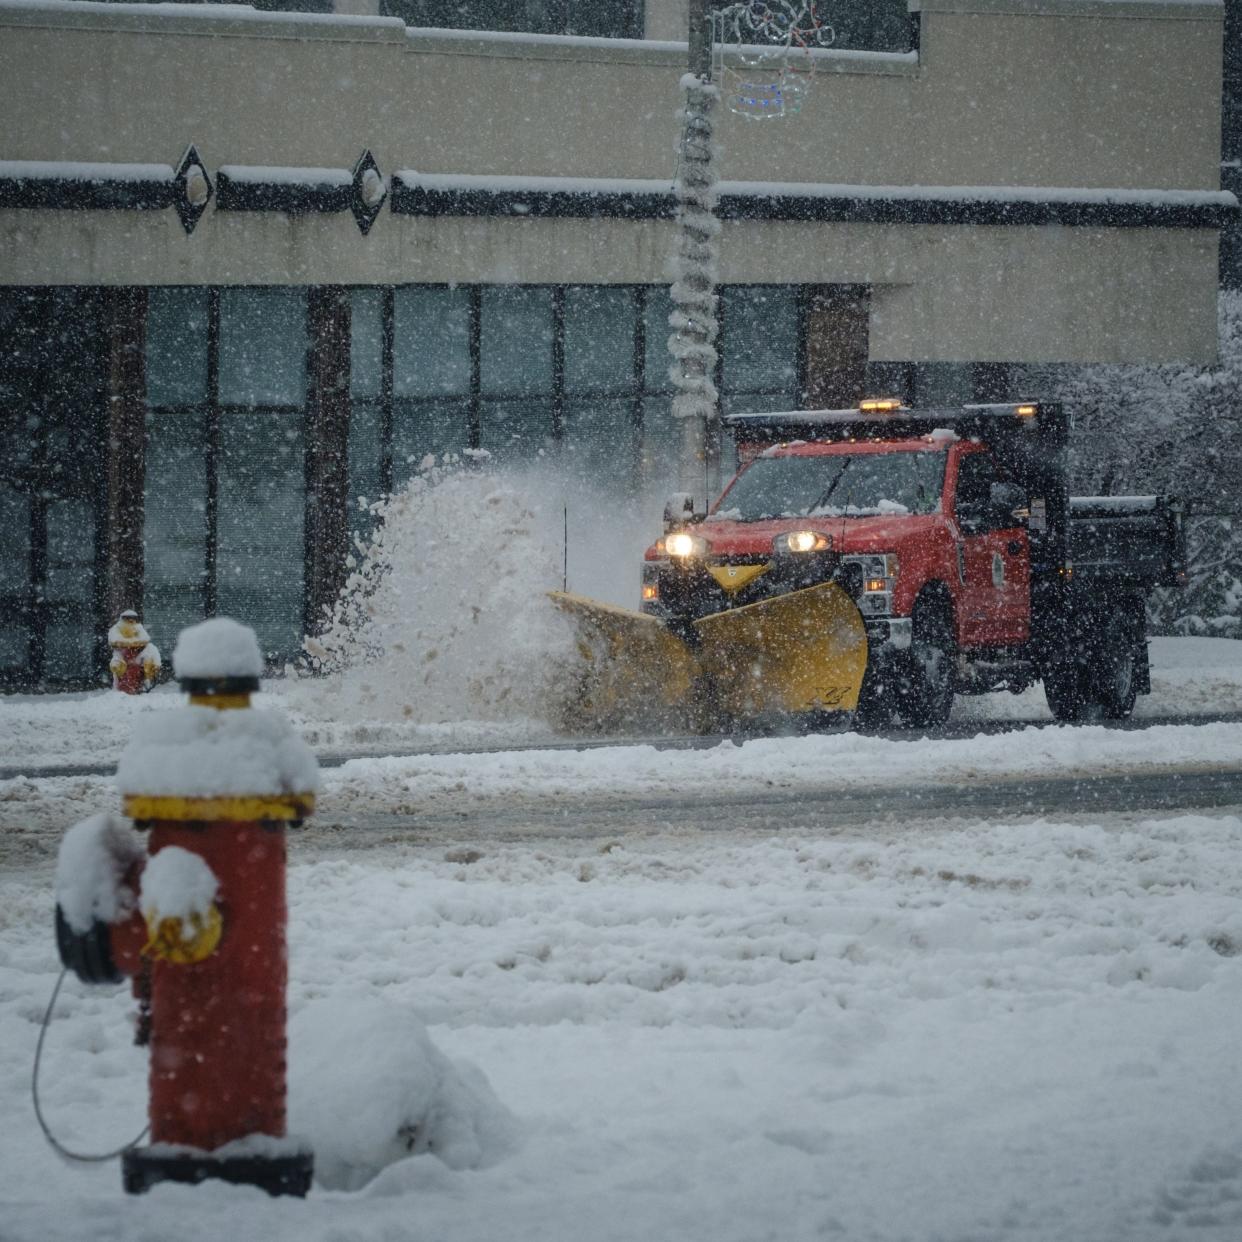 A snow plow is put to work on Genesee Street in downtown Utica on Friday, December 16, 2022.